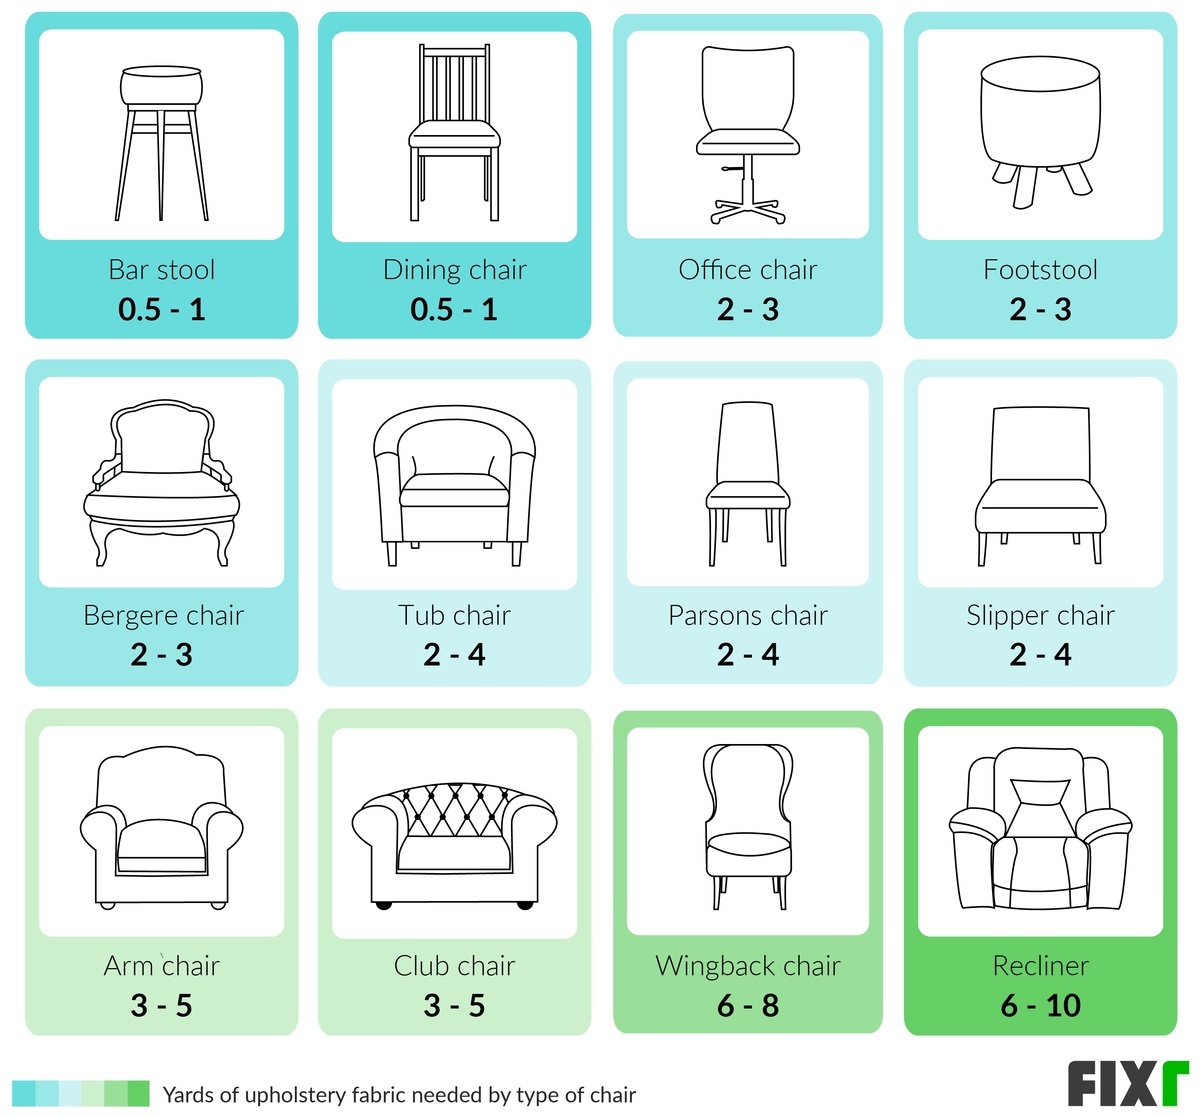 2021 Cost To Reupholster A Chair, How Much Does It Cost To Reupholster A Tub Chair